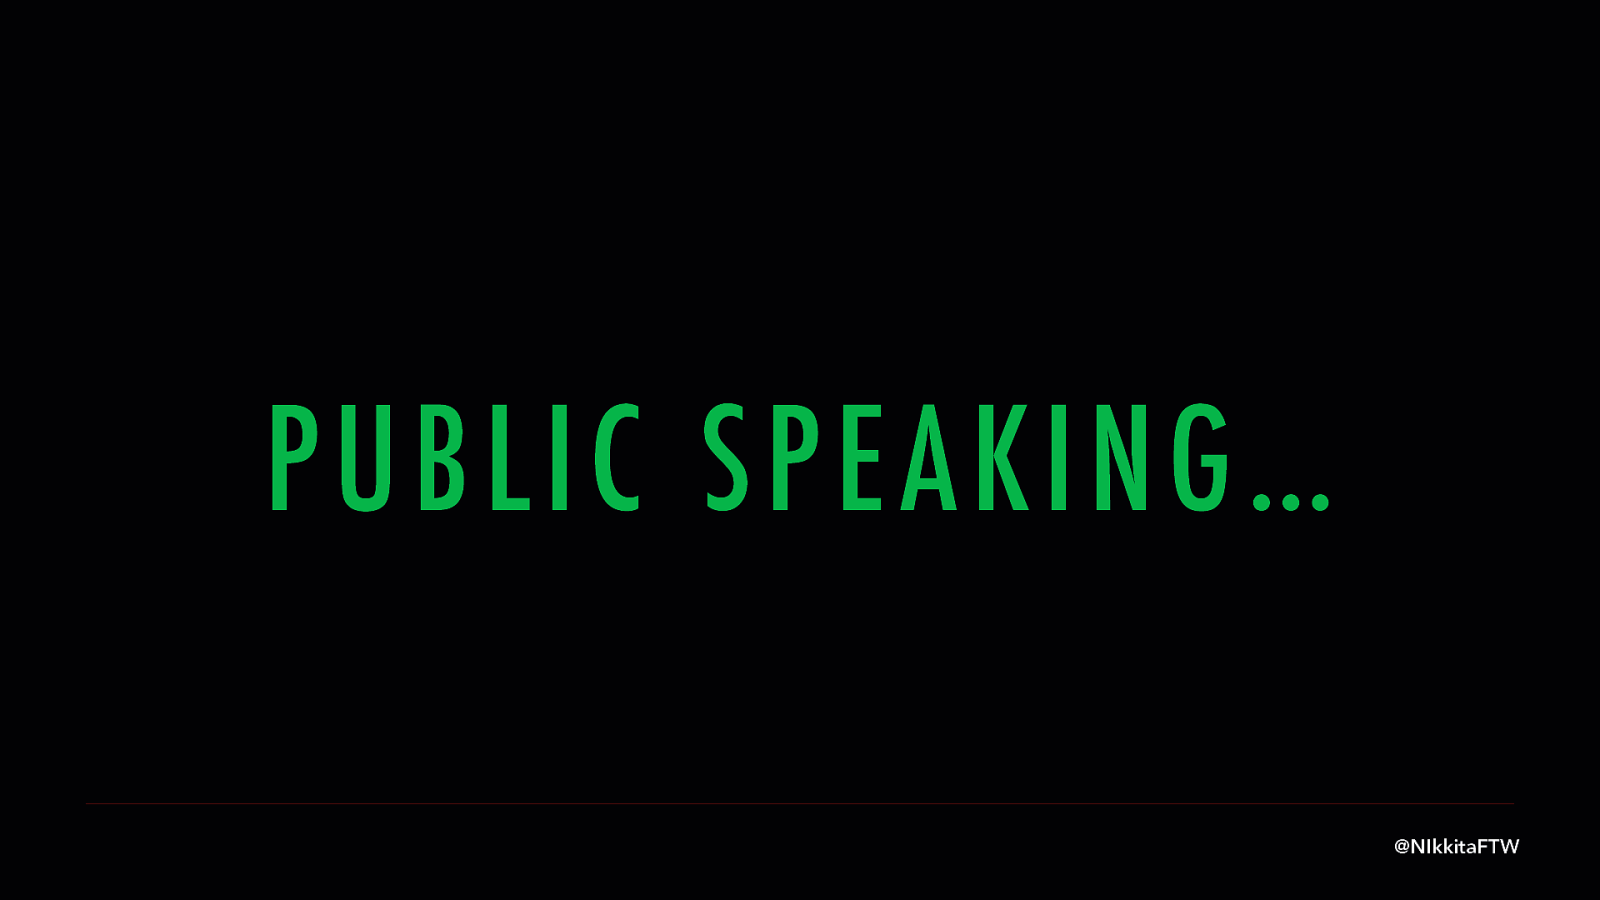 Public Speaking: How Bad Can It Be